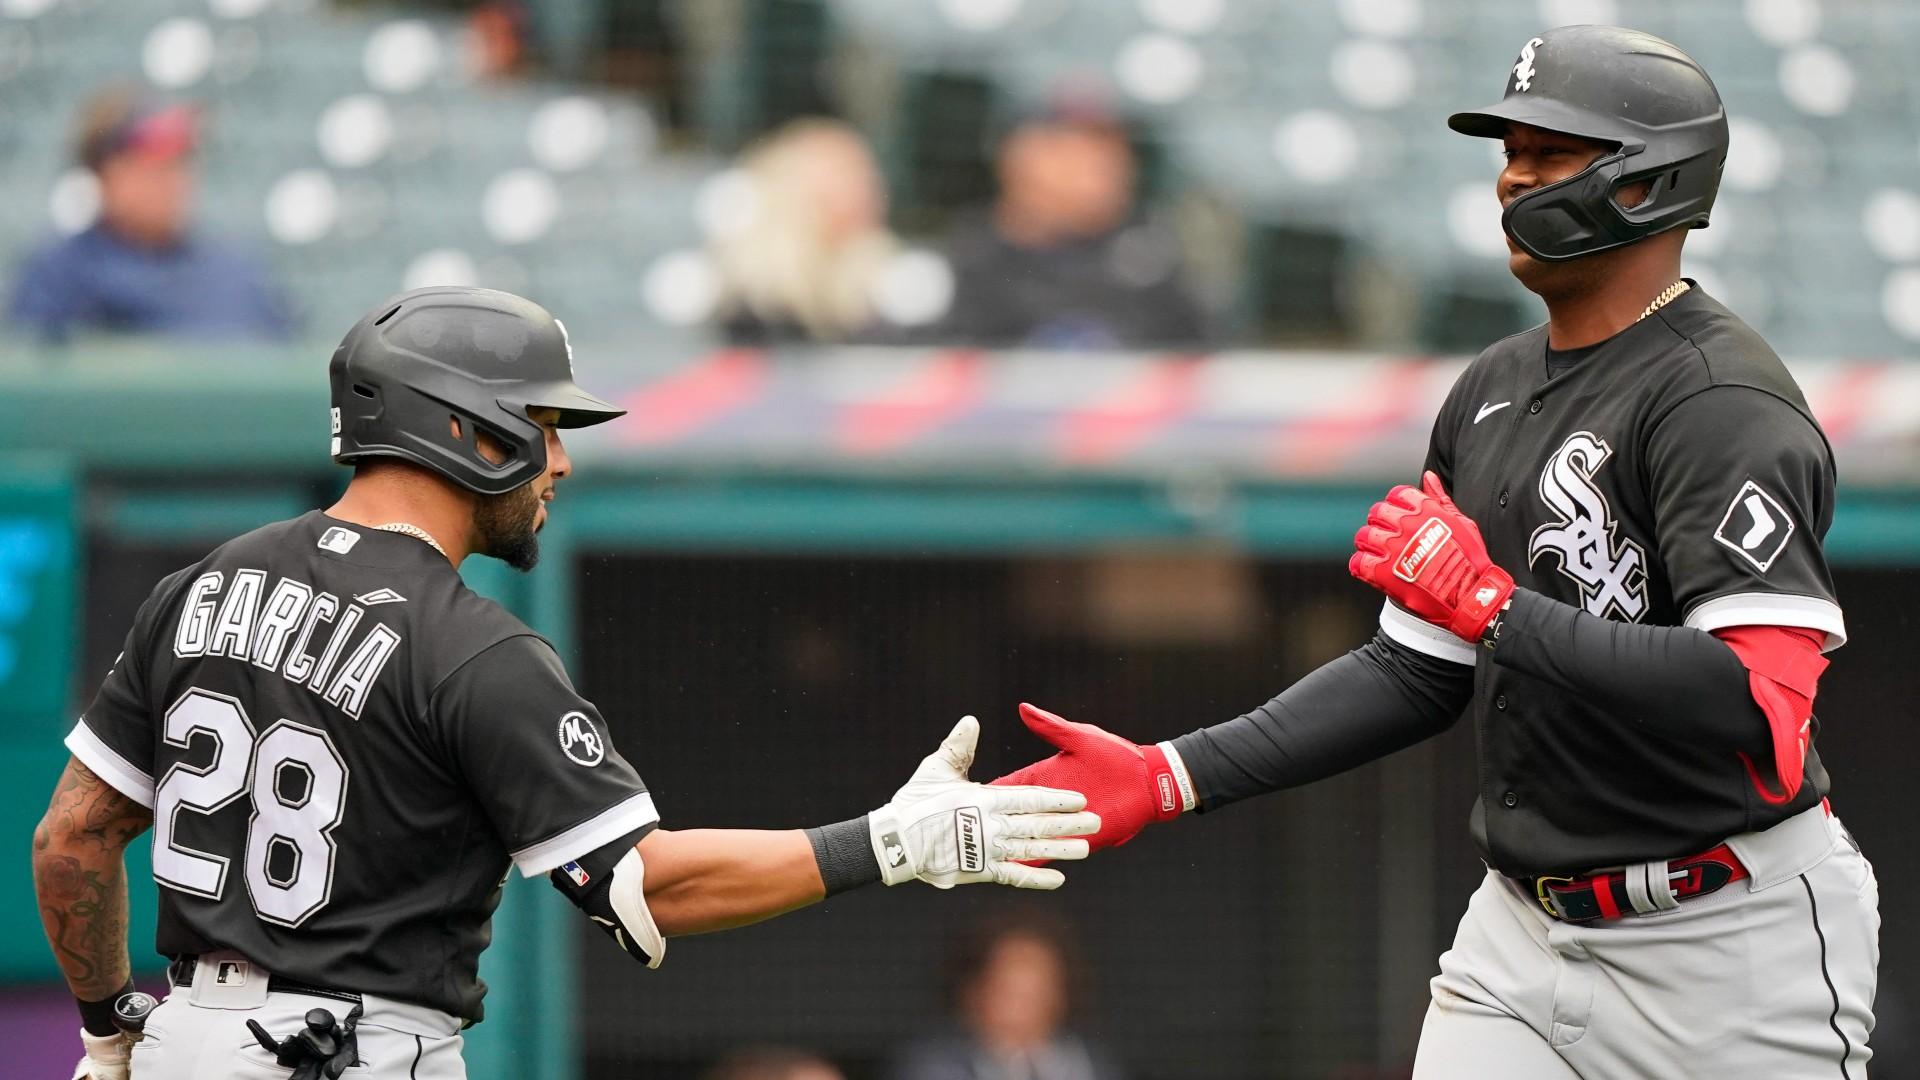 Chicago White Sox’s Eloy Jimenez, right, celebrates with Leury Garcia after Jimenez hit a solo home run in the second inning in the first baseball game of a doubleheader against the Cleveland Indians, Thursday, Sept. 23, 2021, in Cleveland. (AP Photo / Tony Dejak)